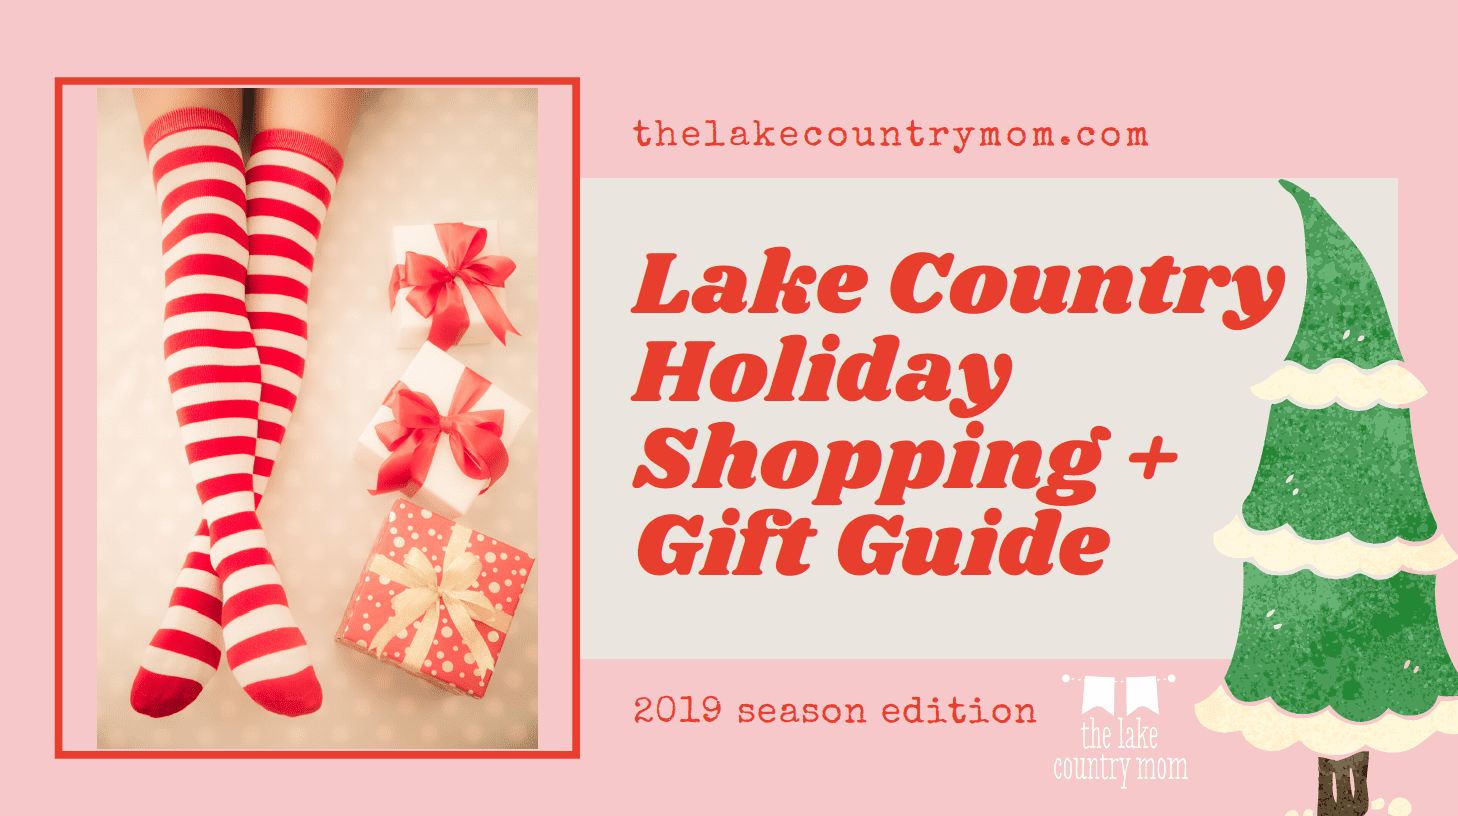 Lake Country Holiday Shopping and Gift Guide 2019